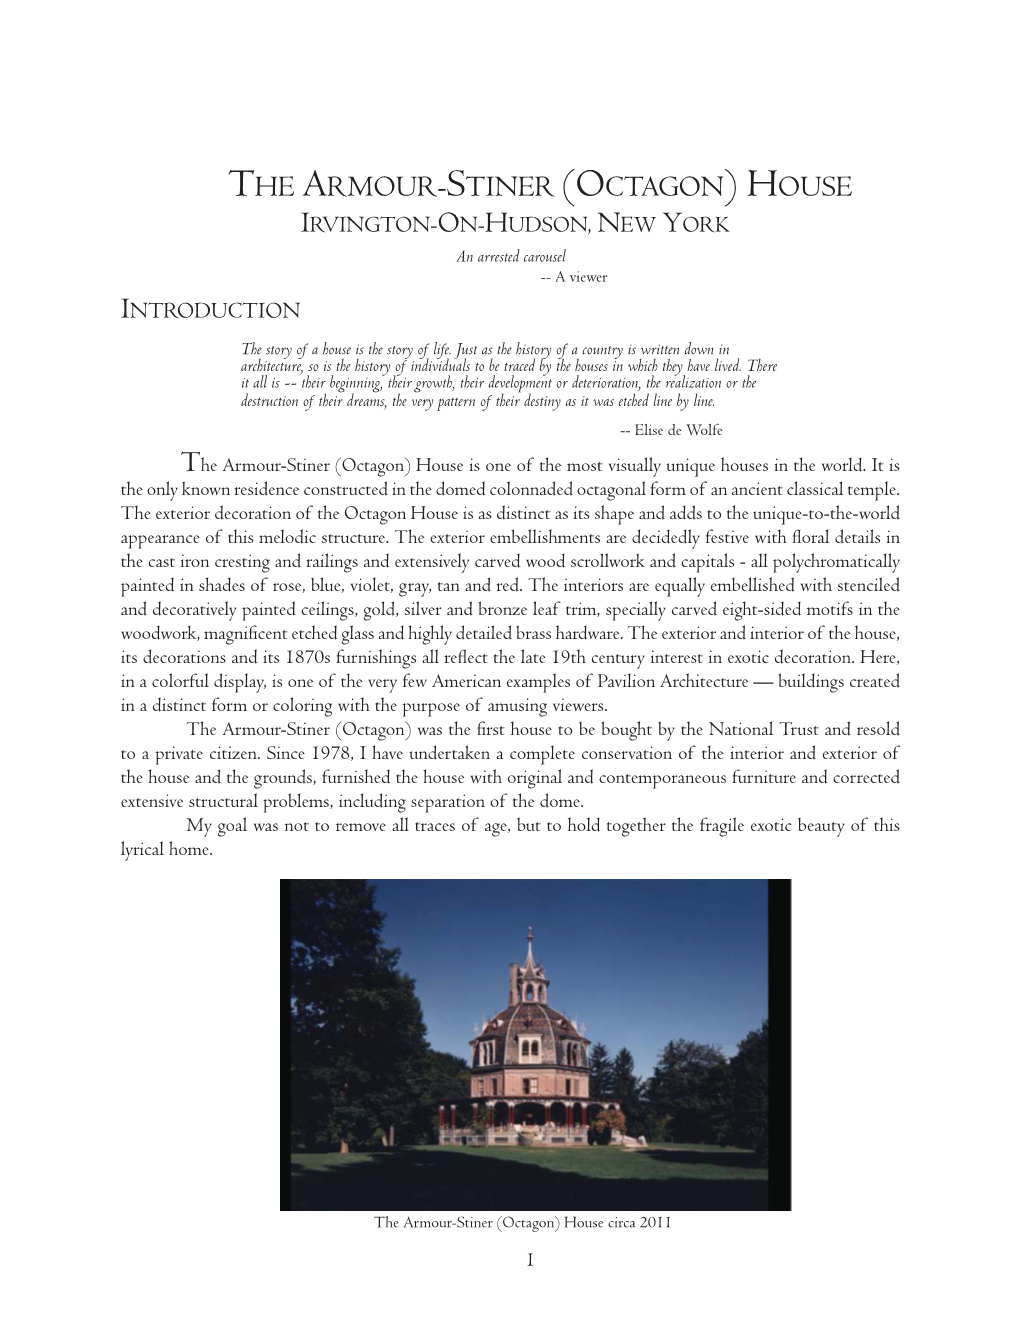 THE ARMOUR-STINER (OCTAGON) HOUSE IRVINGTON-ON-HUDSON, NEW YORK an Arrested Carousel -- a Viewer INTRODUCTION the Story of a House Is the Story of Life